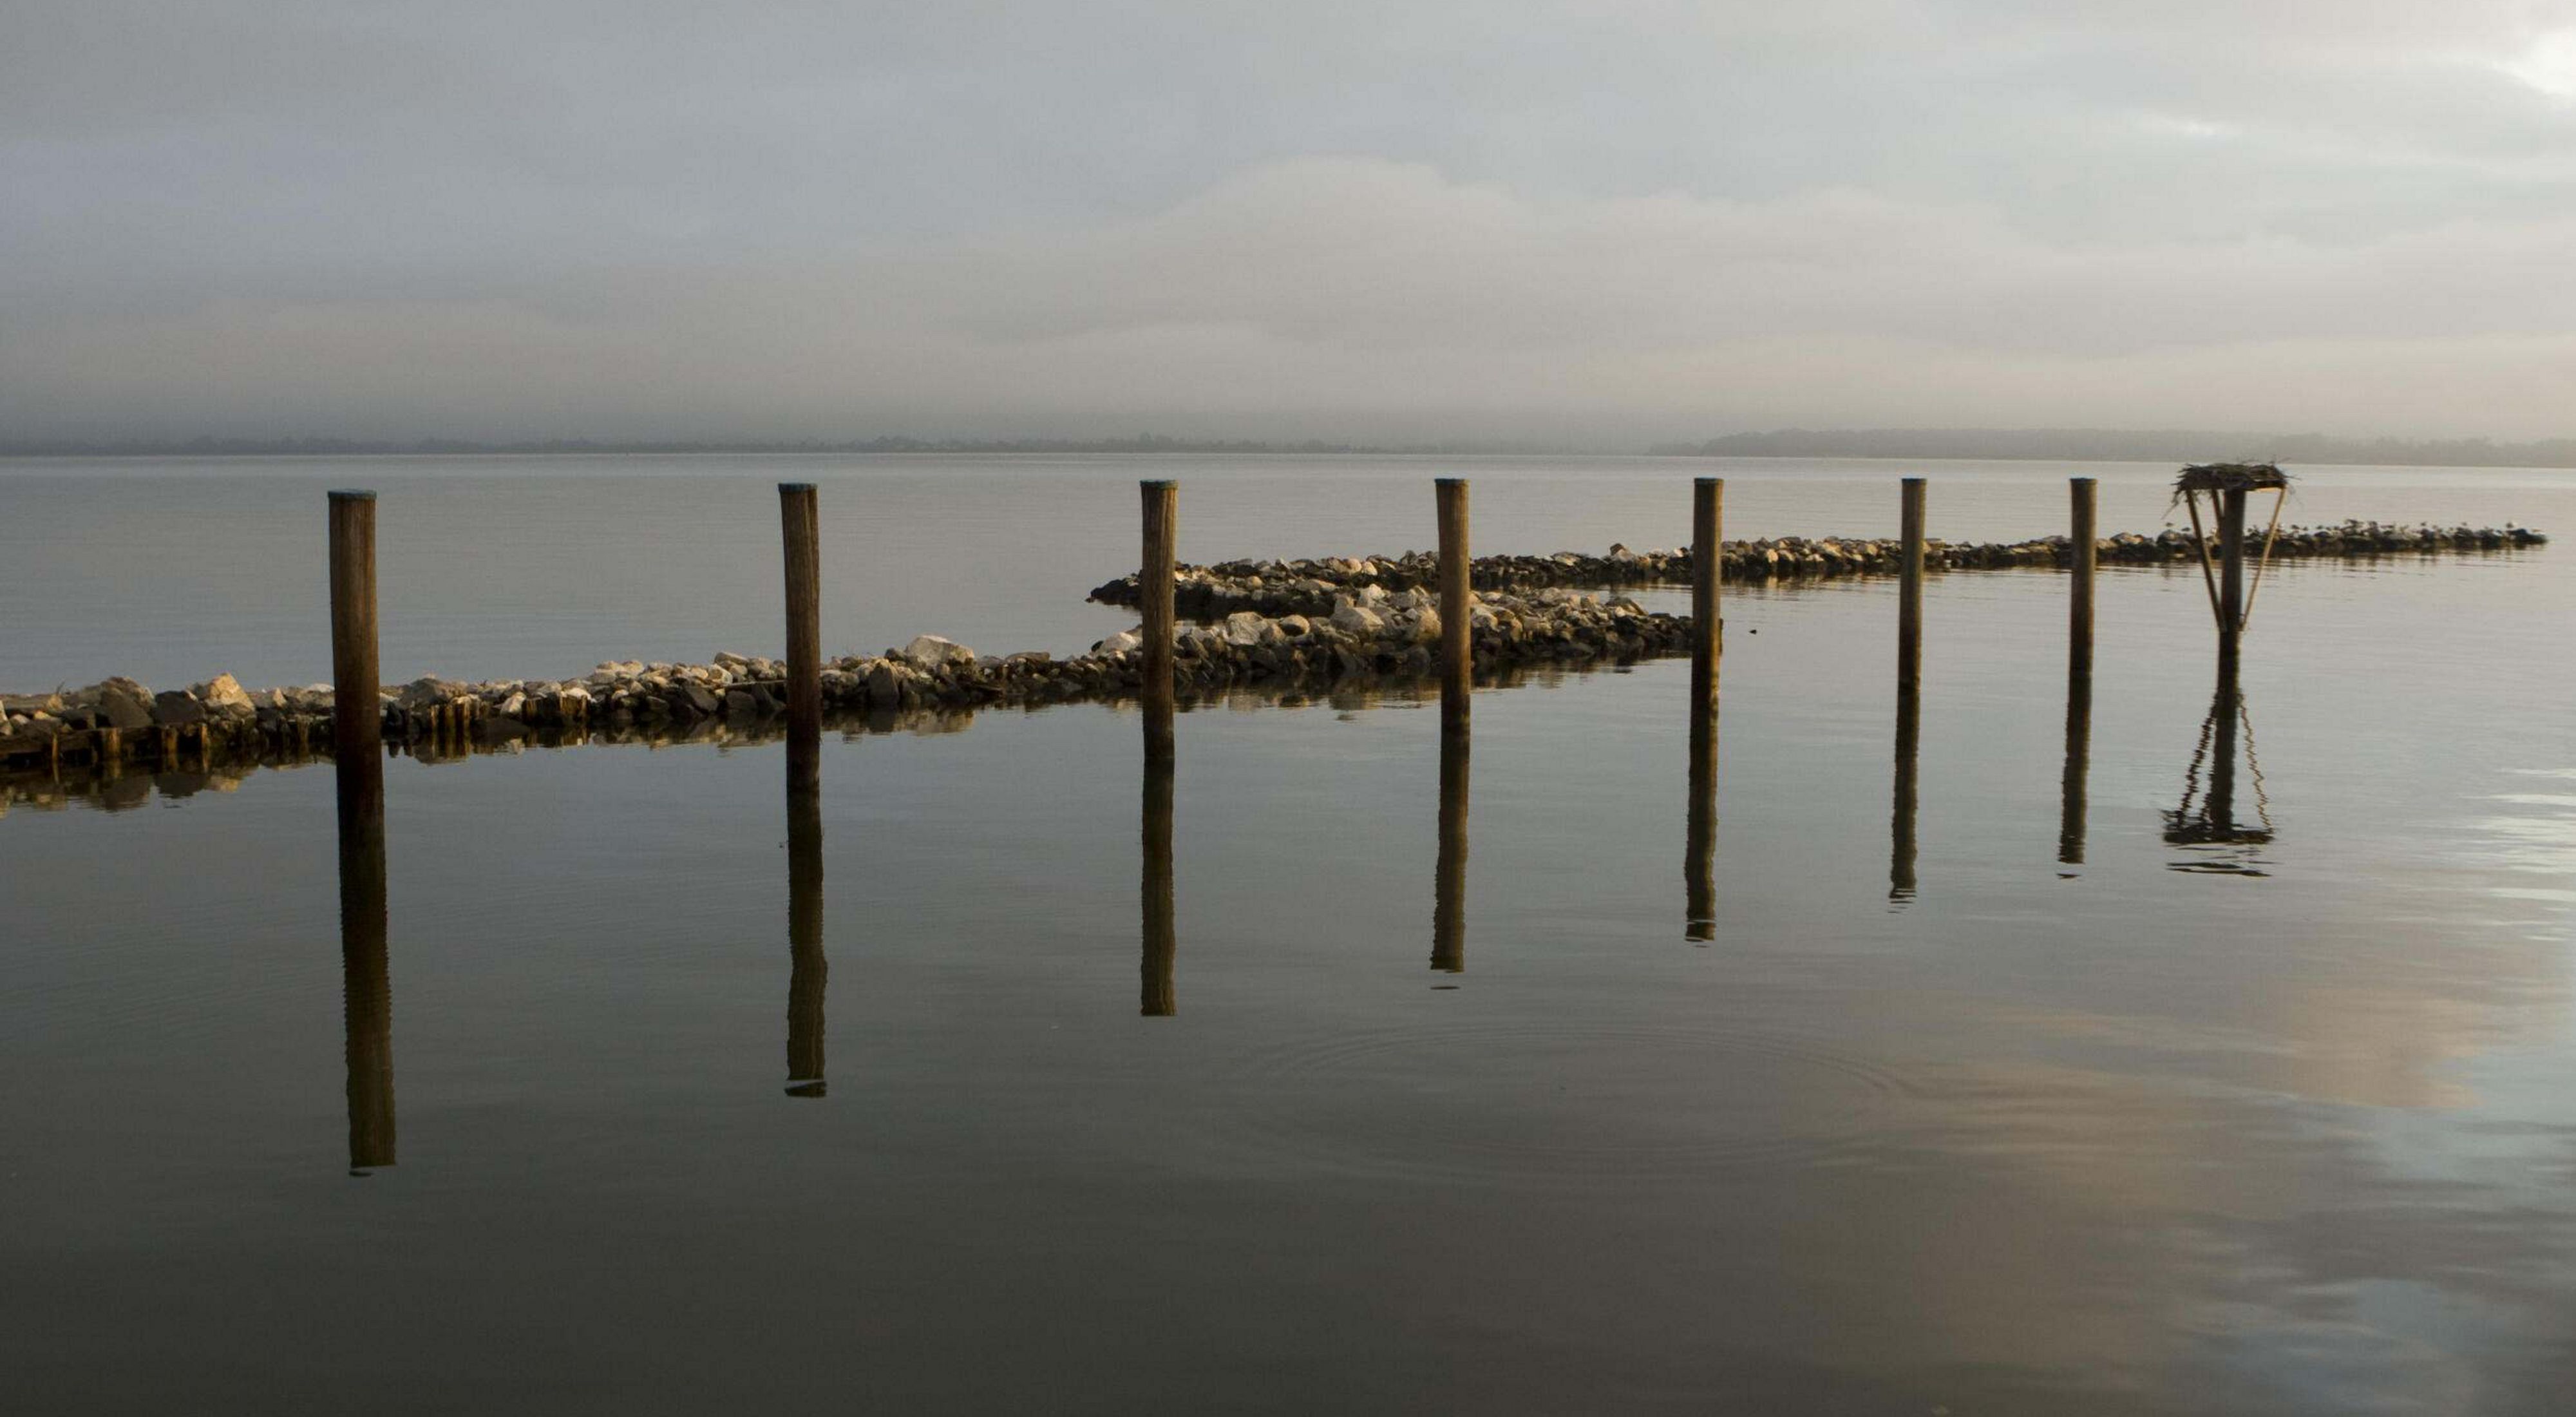 A wooden dock expands out into calm waters.